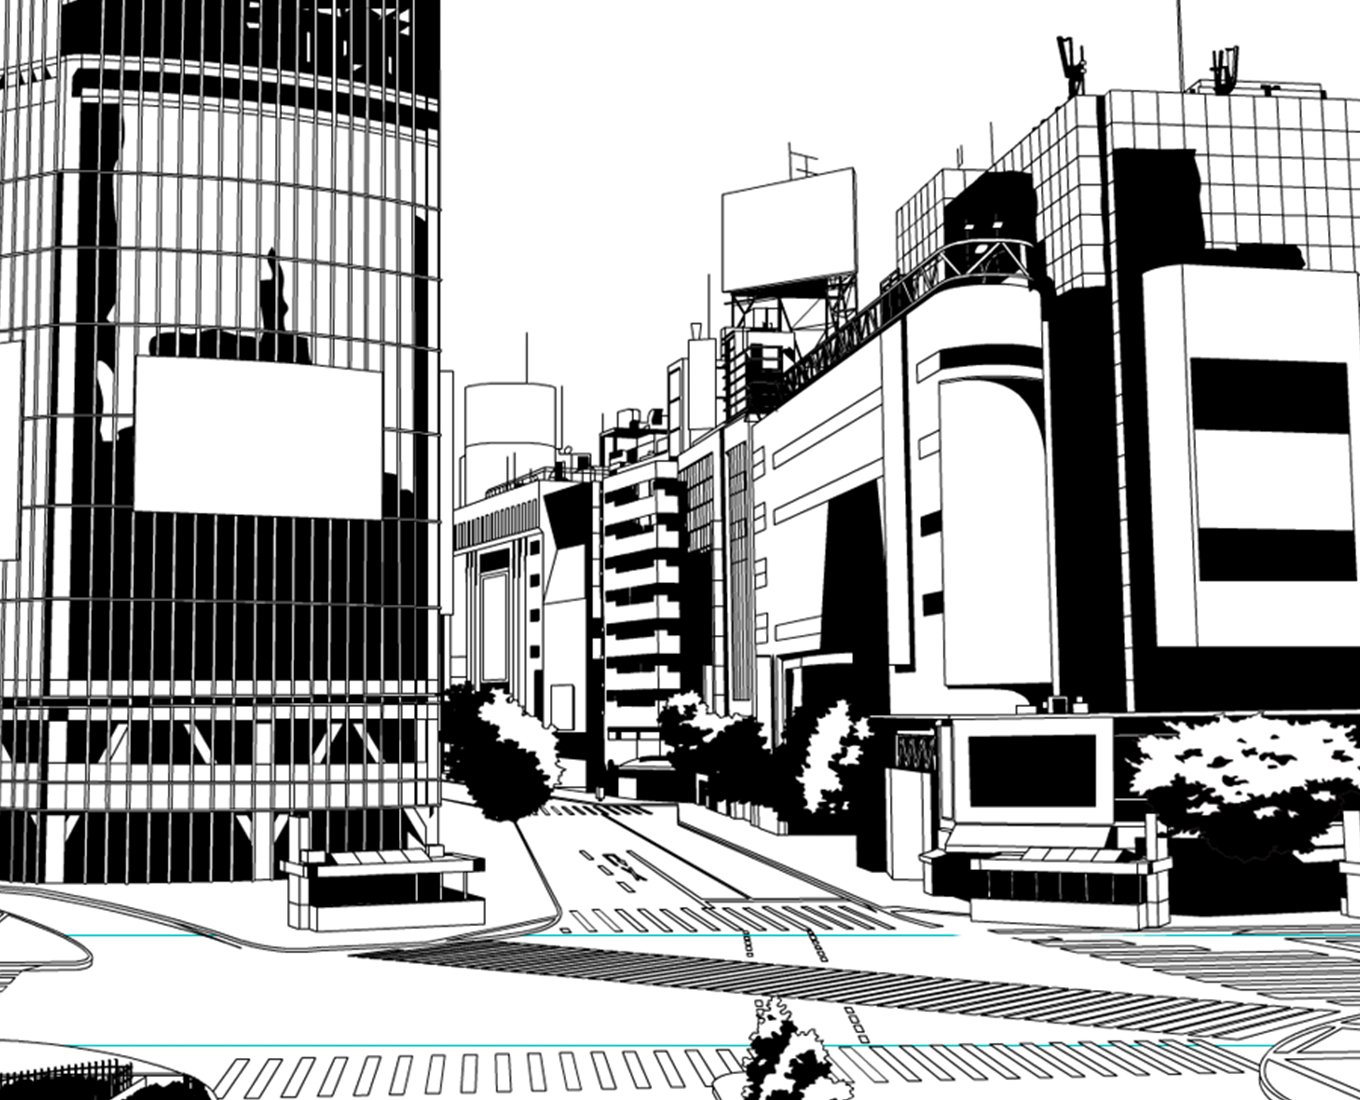 A sketch of a metropolitan street and buildings without people.